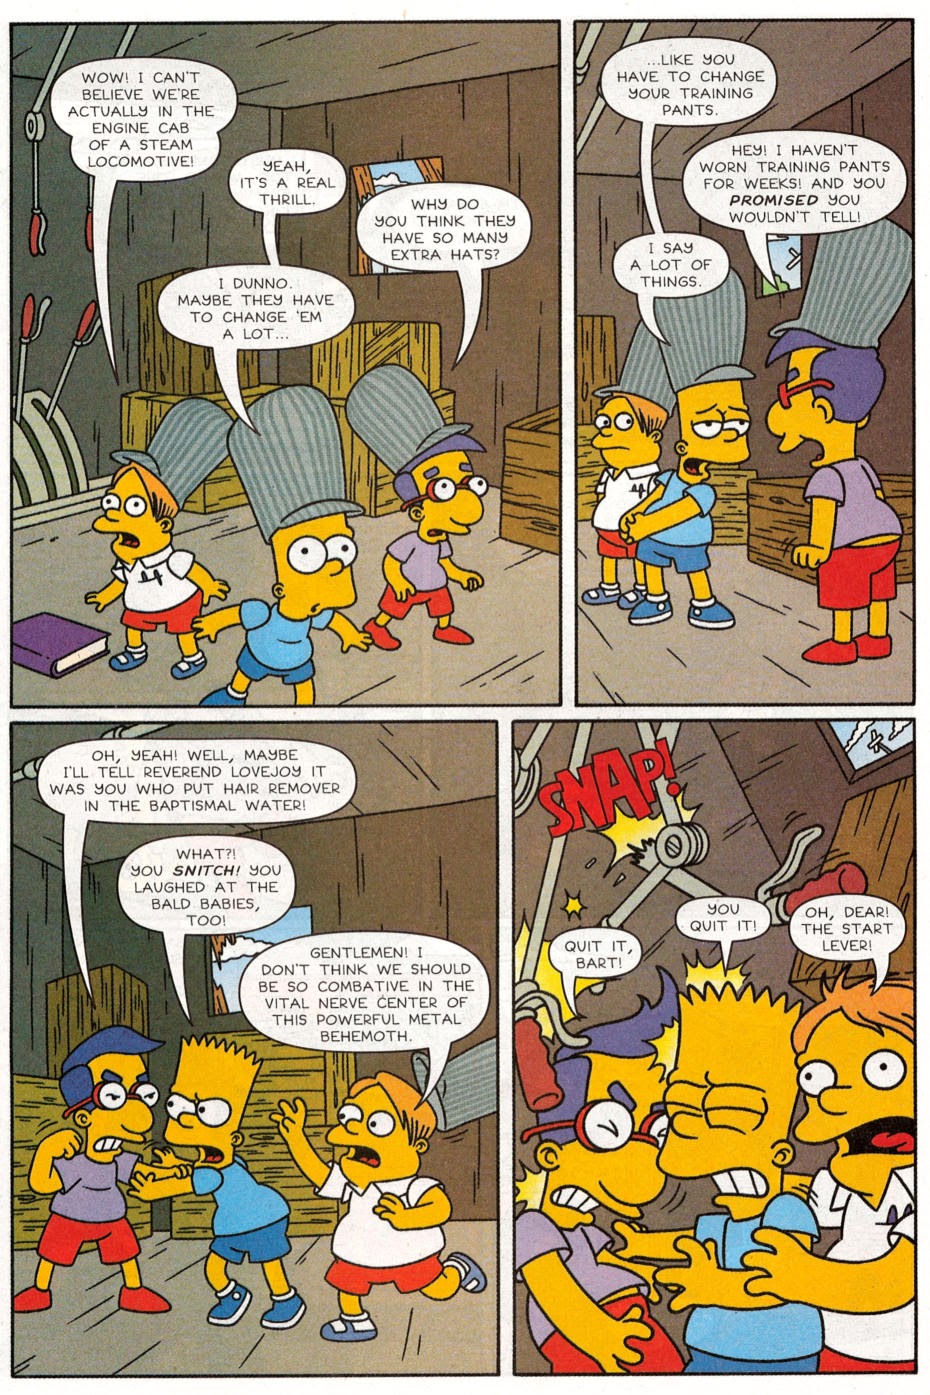 Read online Bart Simpson comic -  Issue #30 - 21